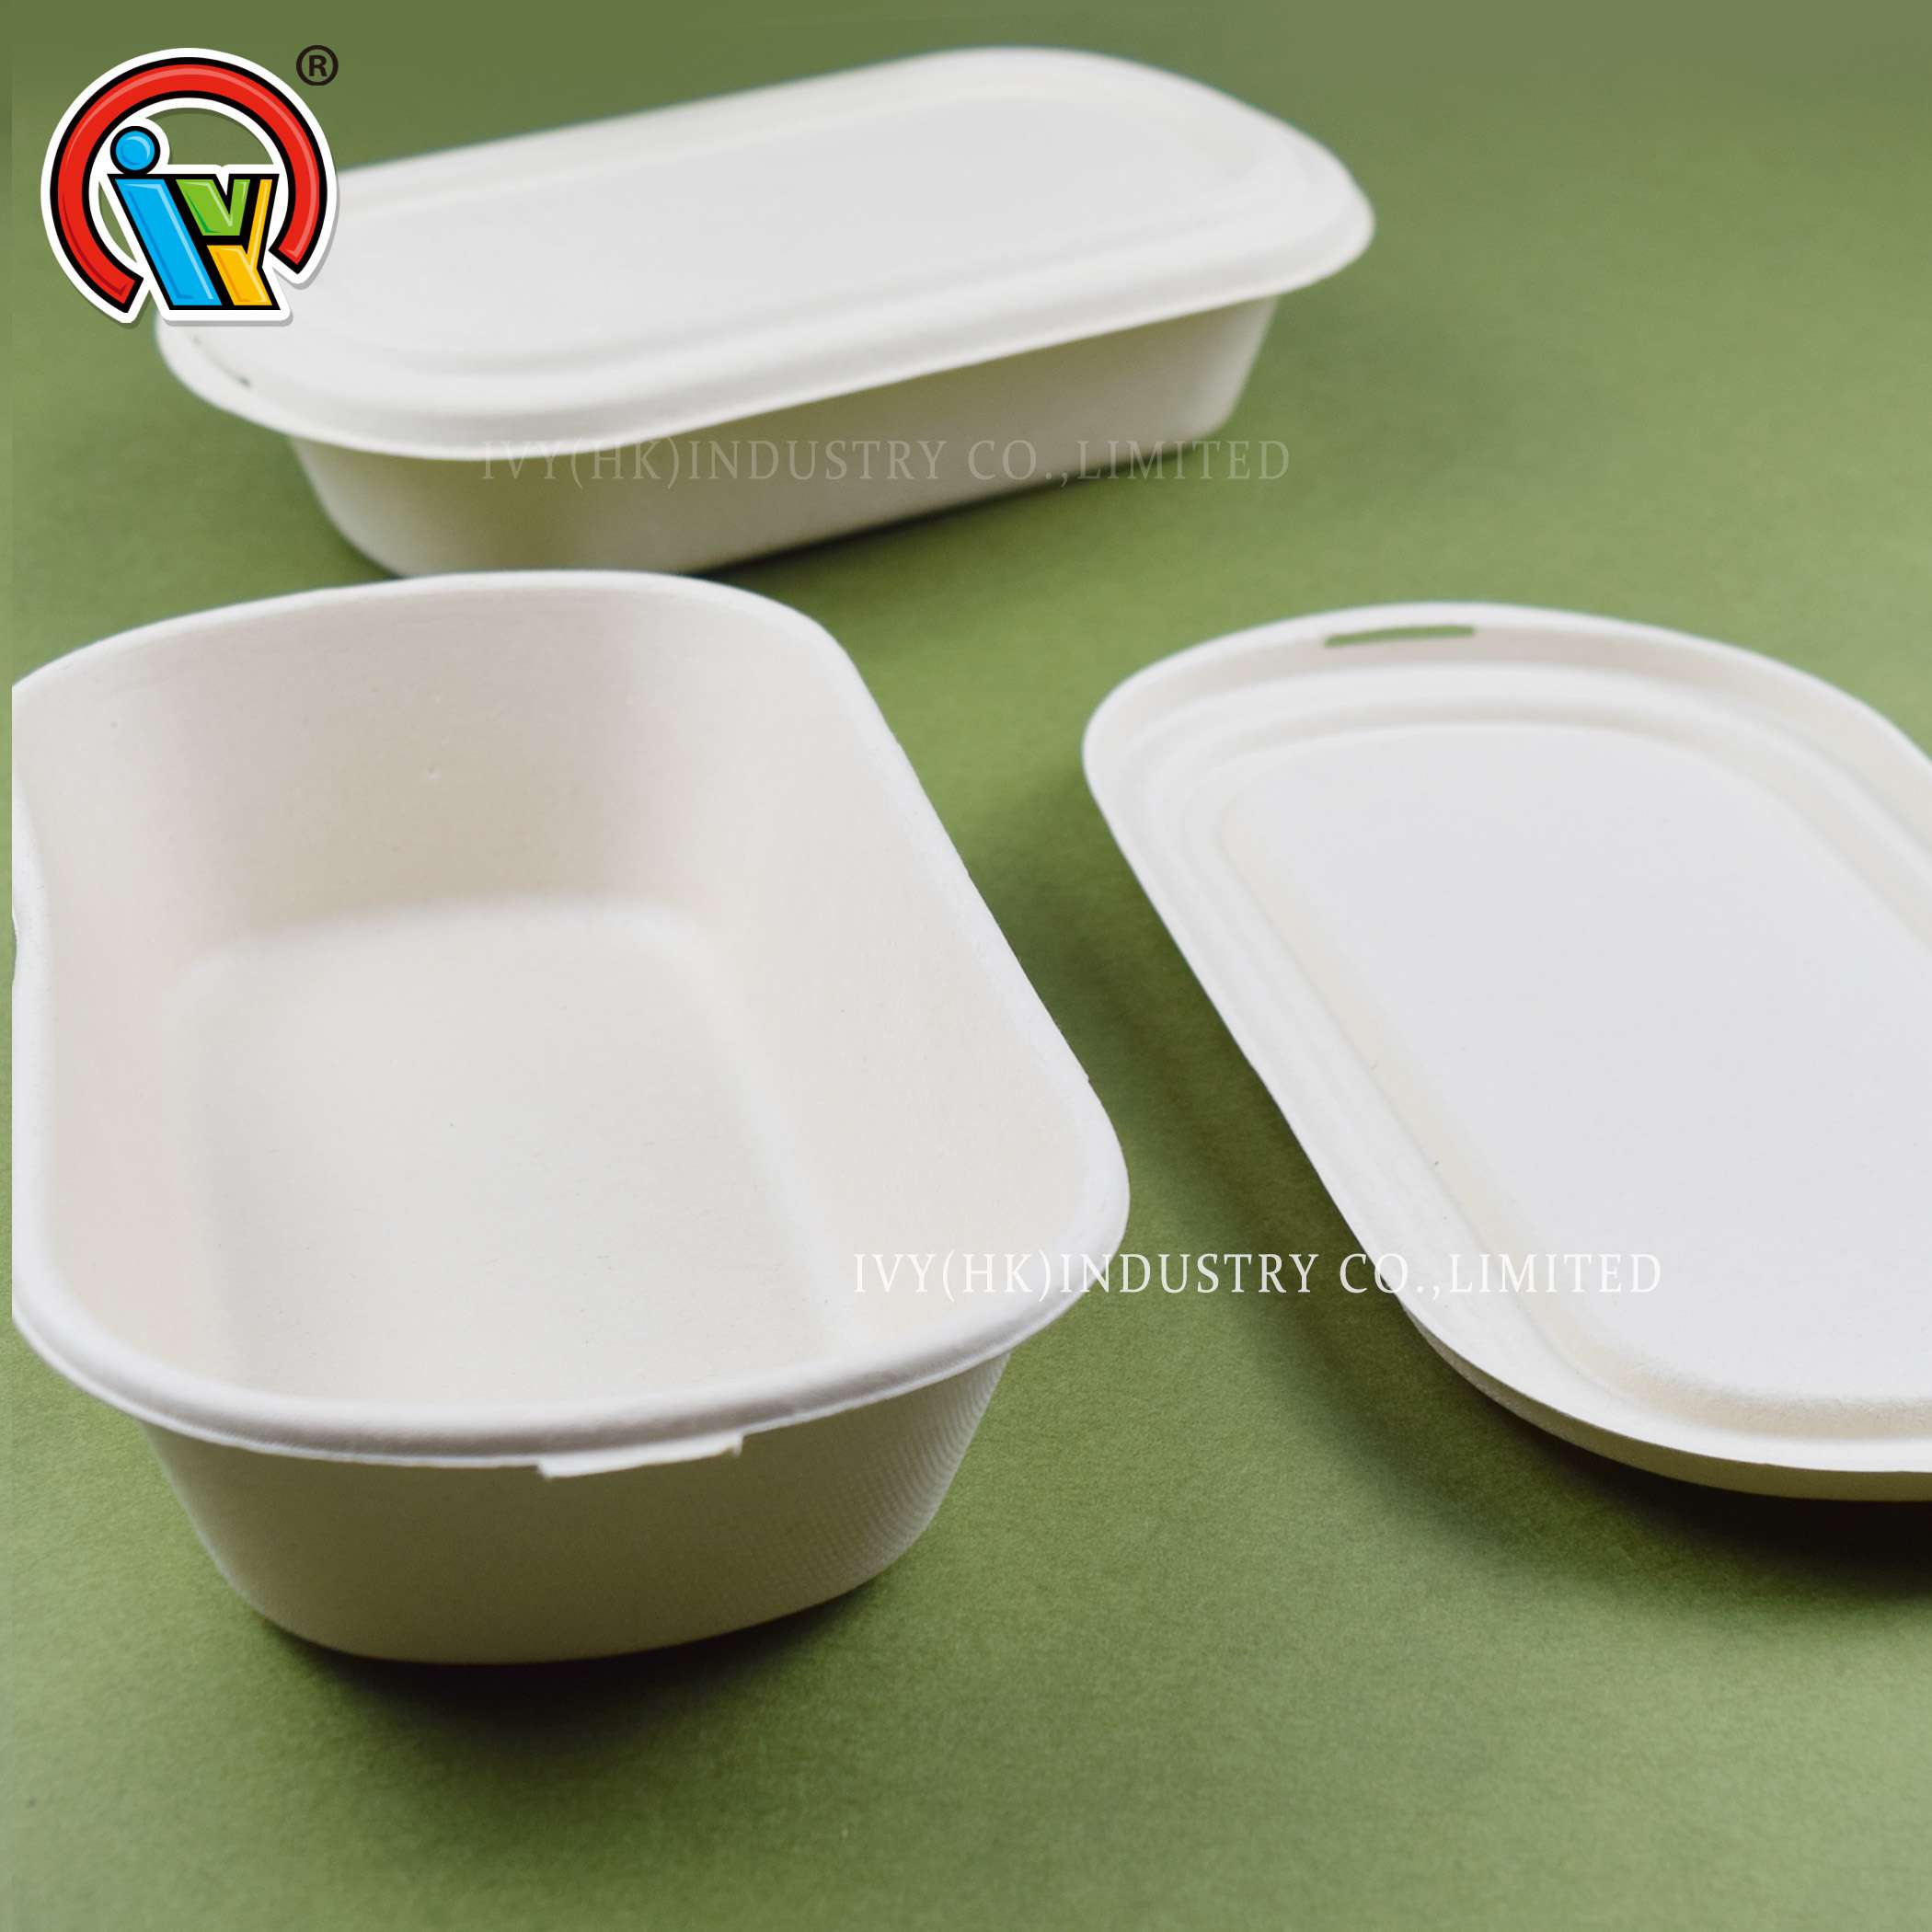 Eco friendly biodegradable lunch box